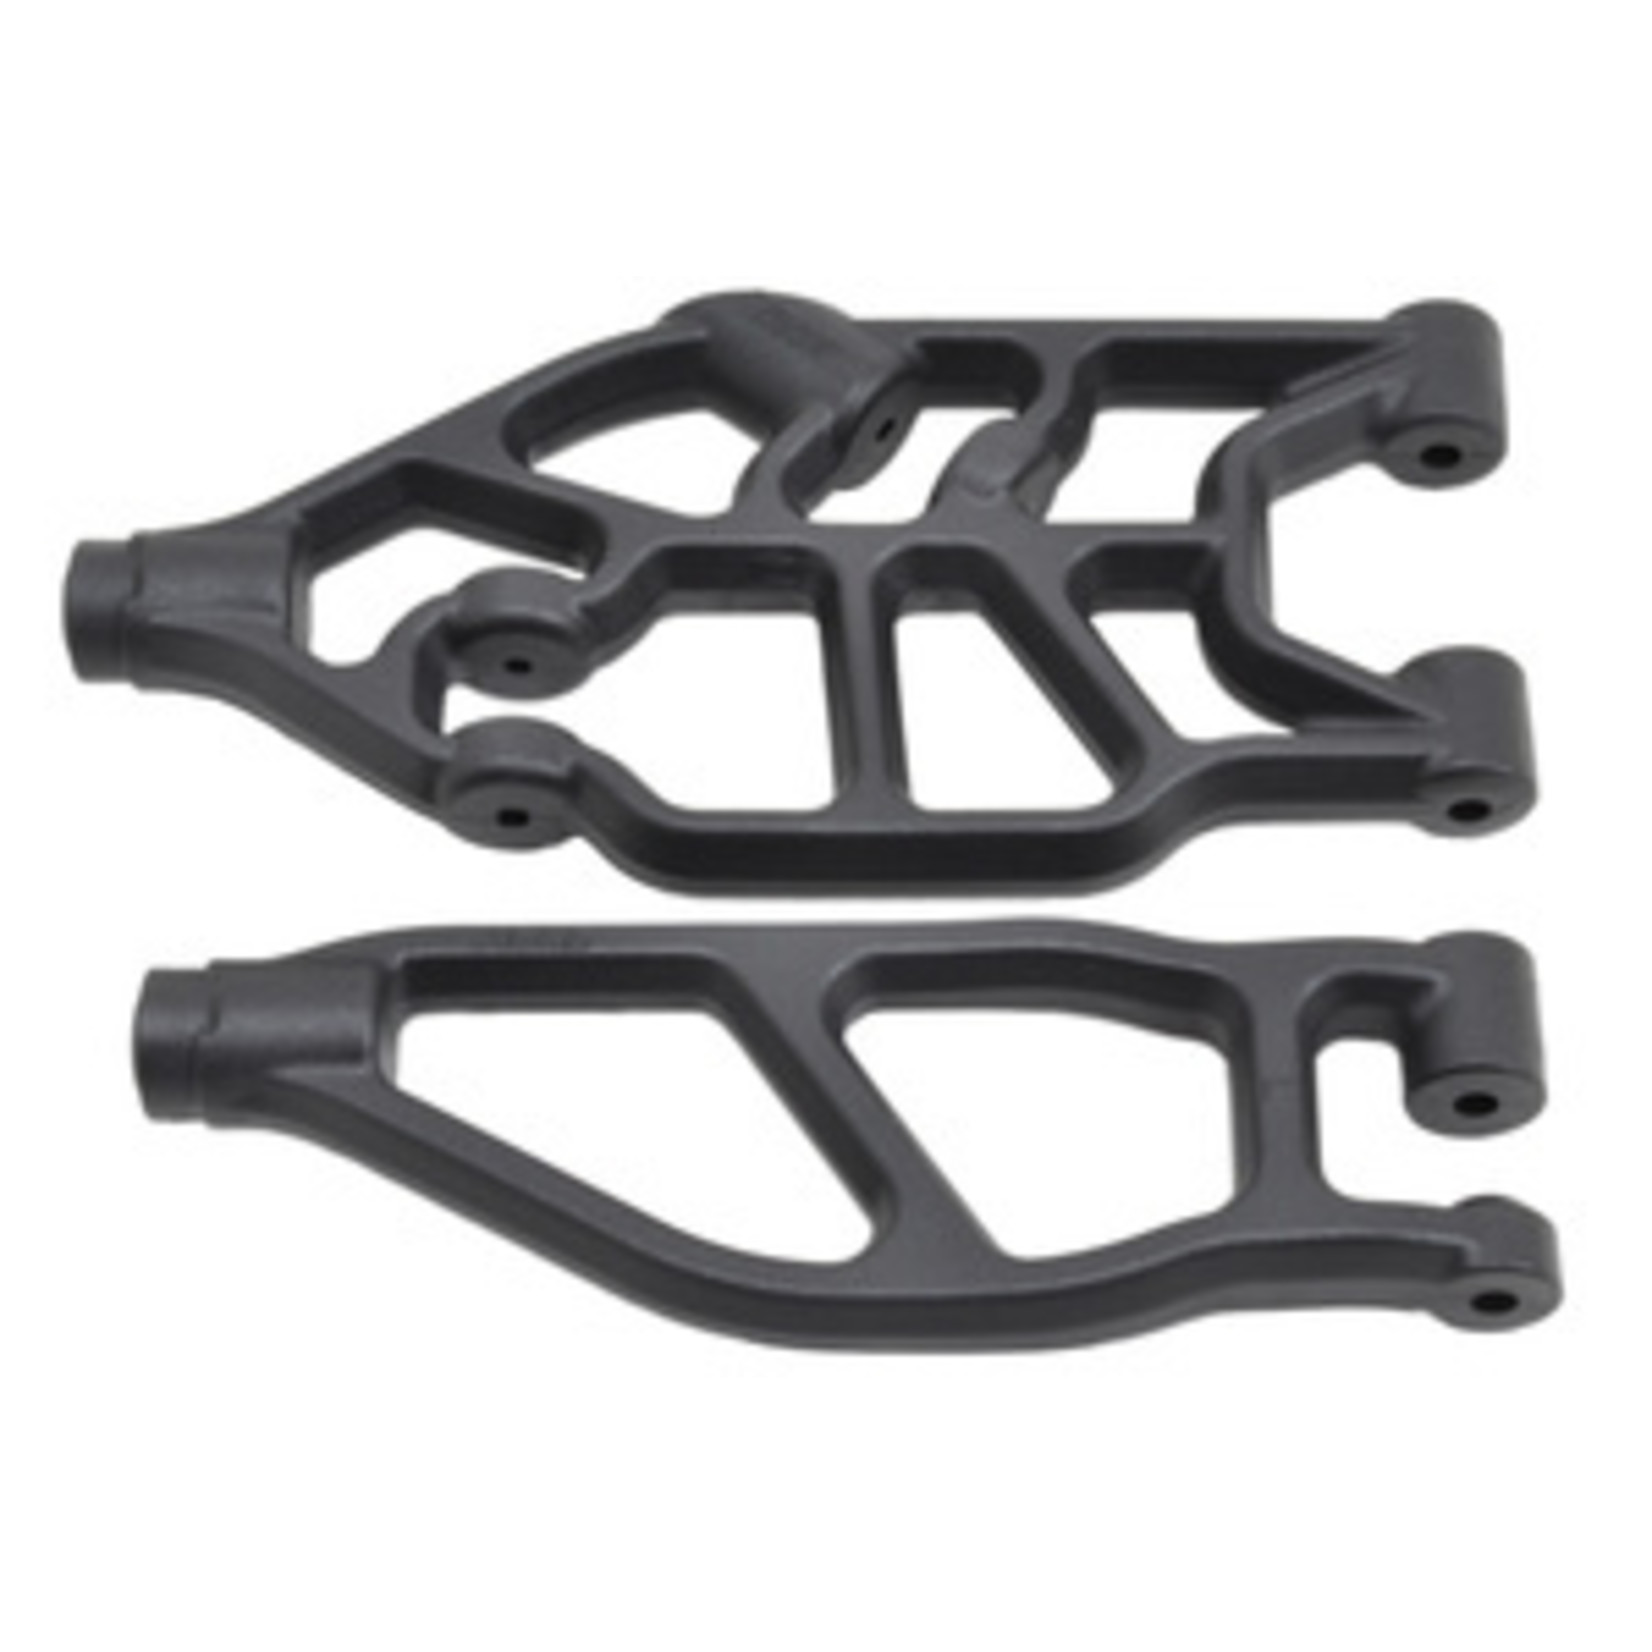 RPM R/C Products RPM81522  Front Left Upper & Lower Arms for ARRMA Kraton 8S & Outcast